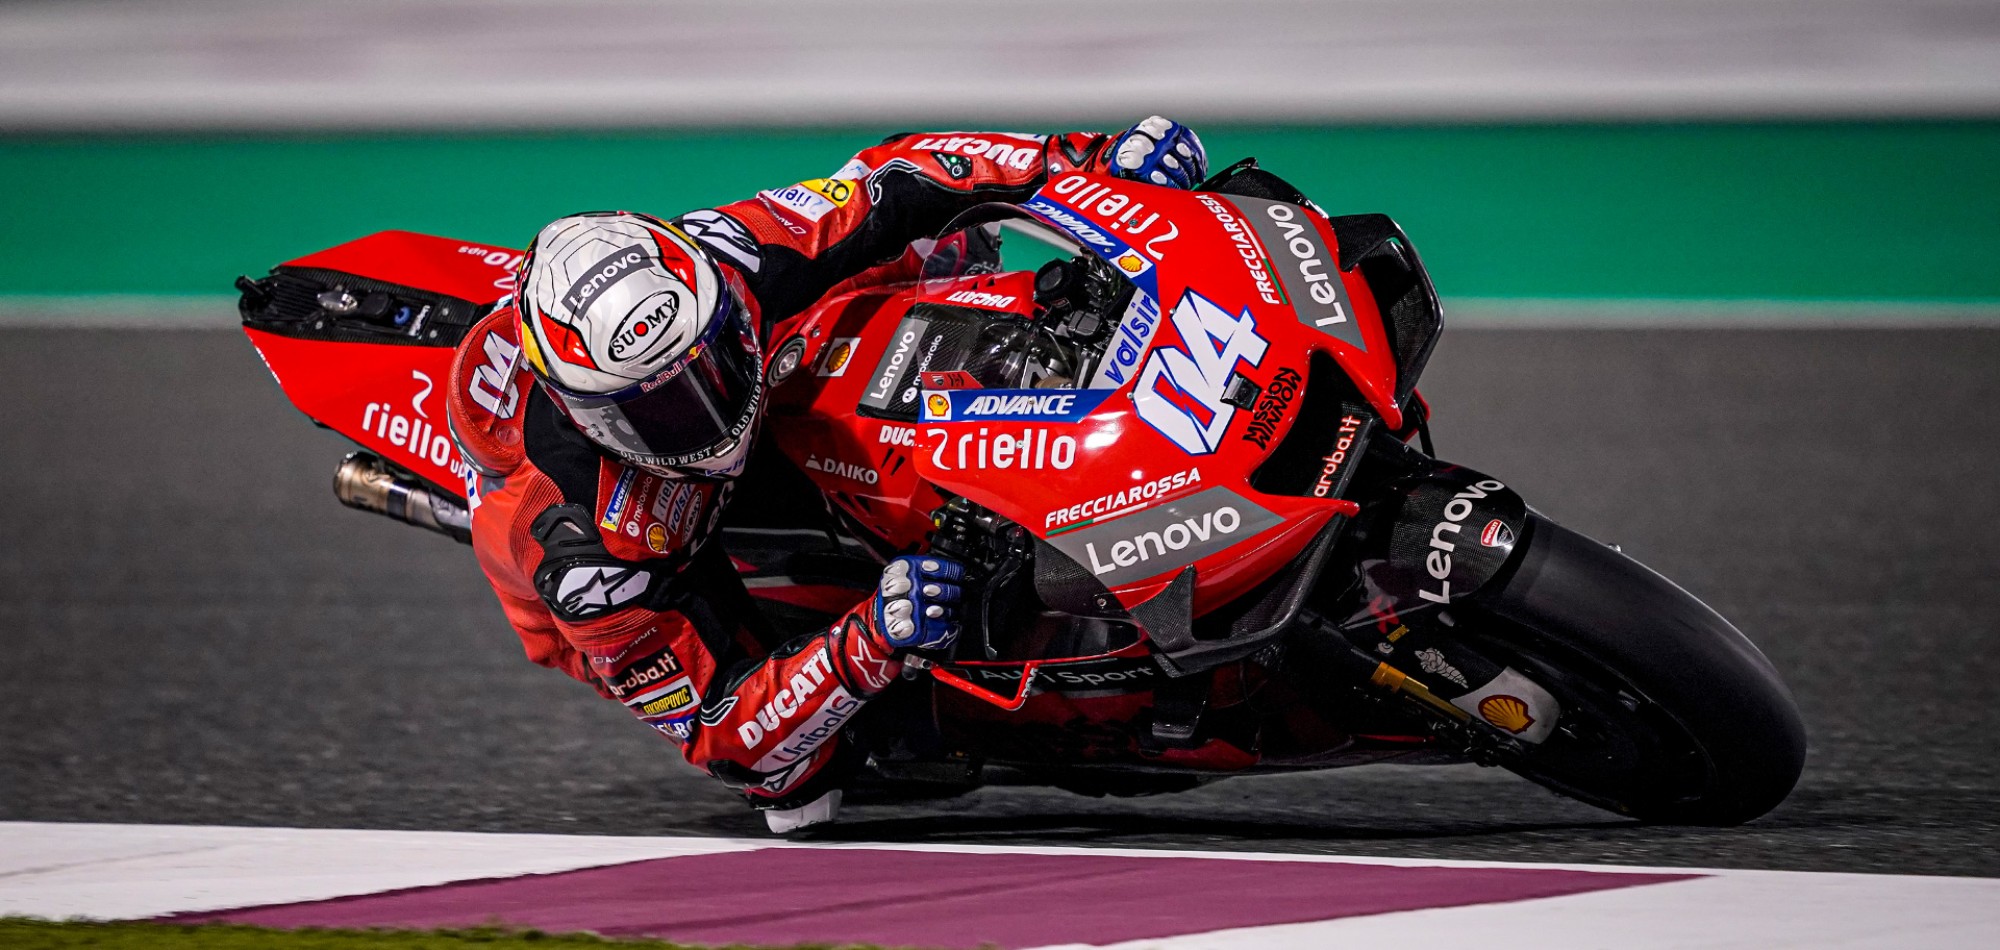 Qatar to headline two MotoGP races starting on March 28